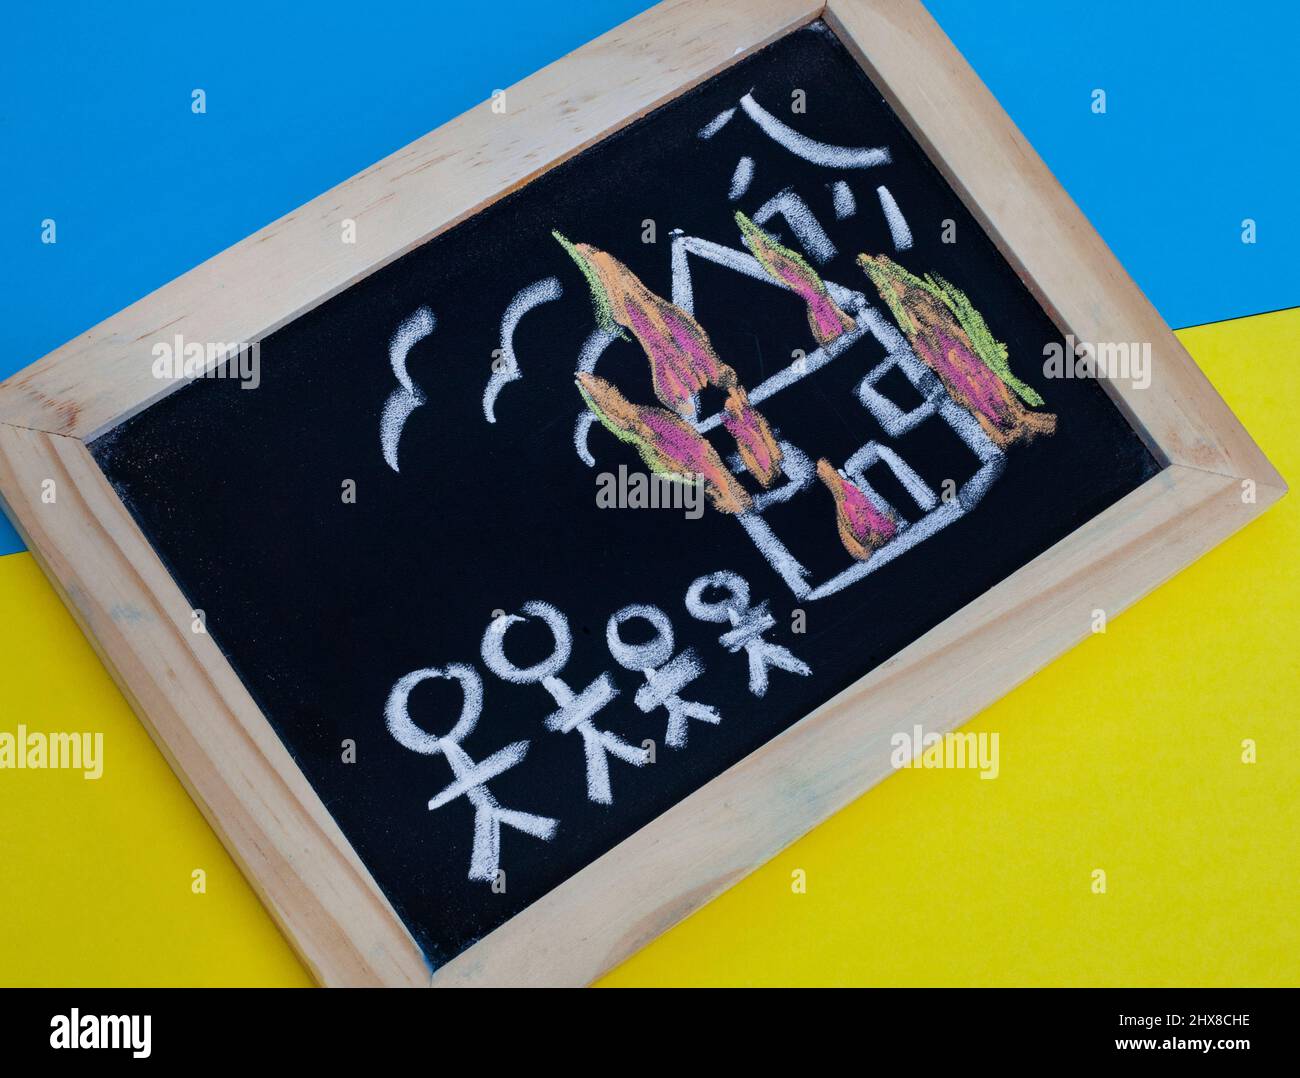 children's drawings on chalkboard with Ukrainian colors depicting the loss and destruction faced by refugees of Russian invasion of Ukraine 2022 Stock Photo